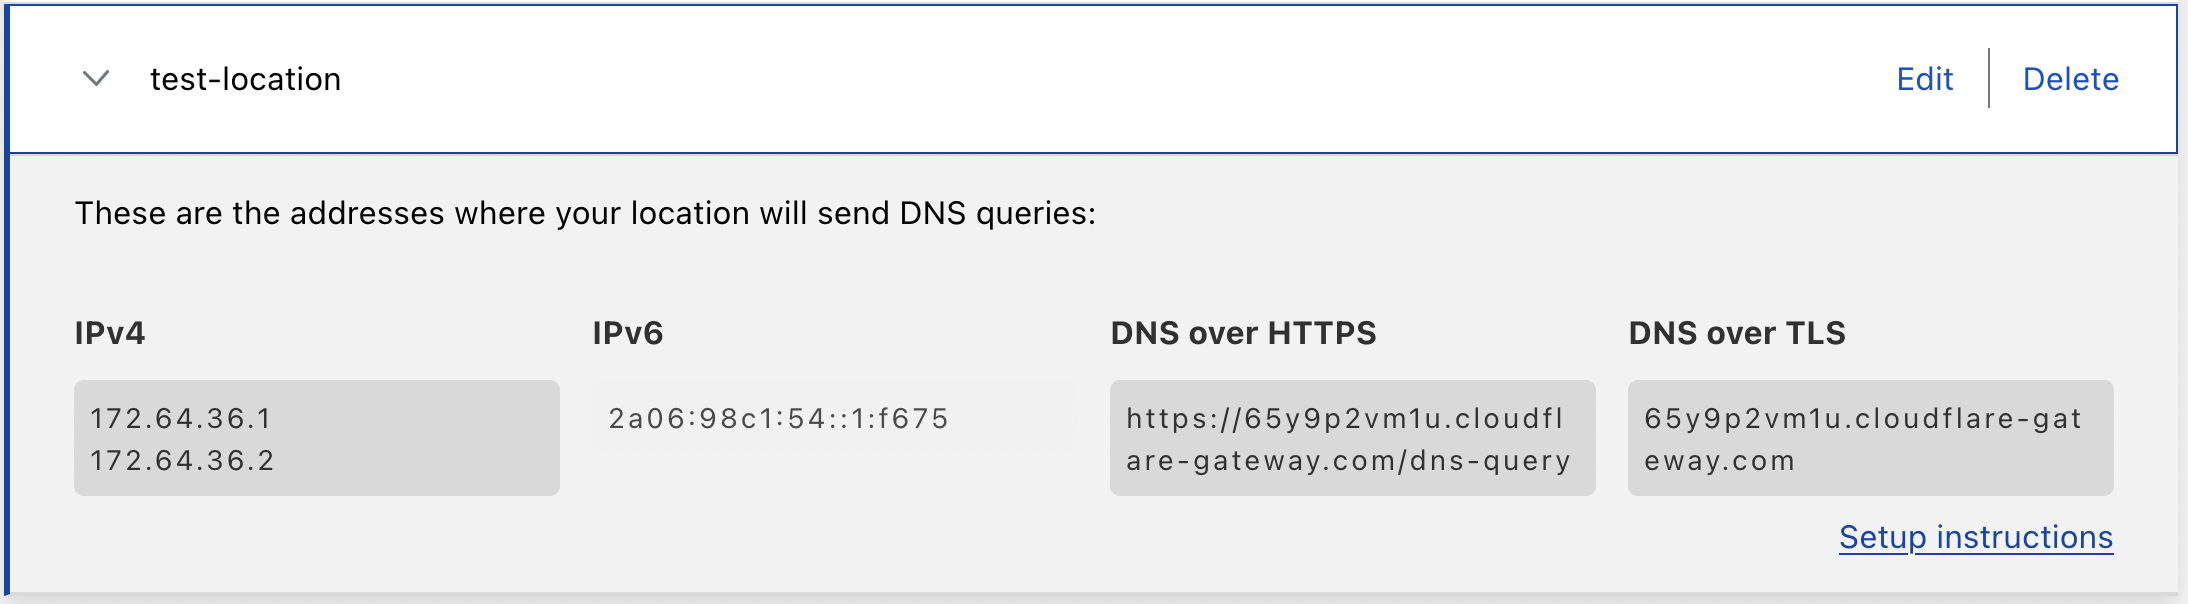 View IP addresses and hostnames assigned to a DNS location